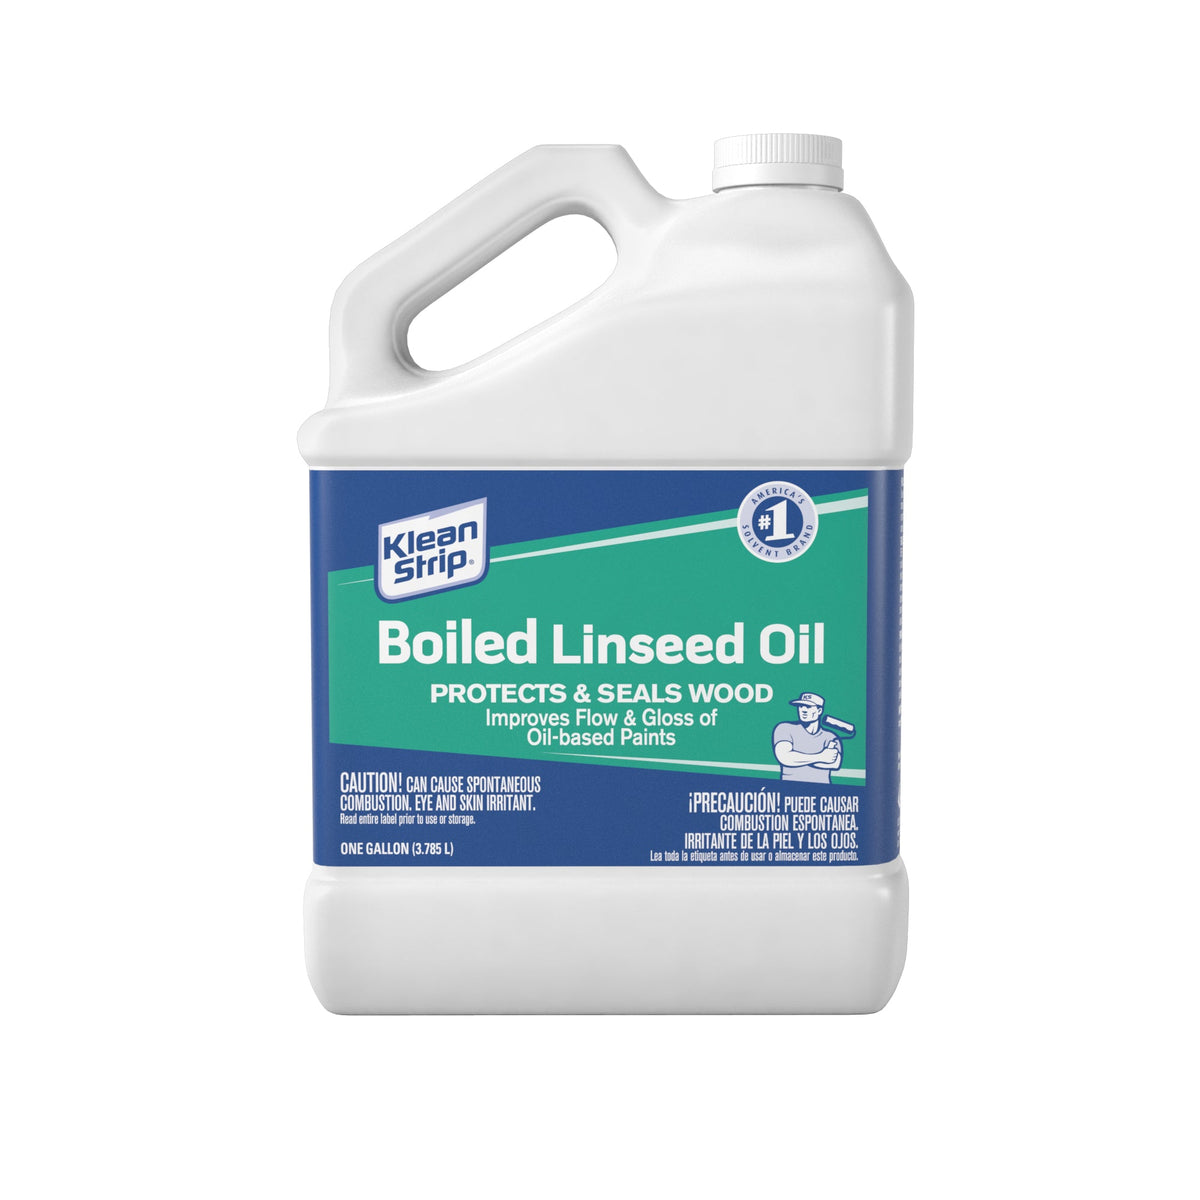 Klean-Strip Boiled Linseed Oil - 1 qt can